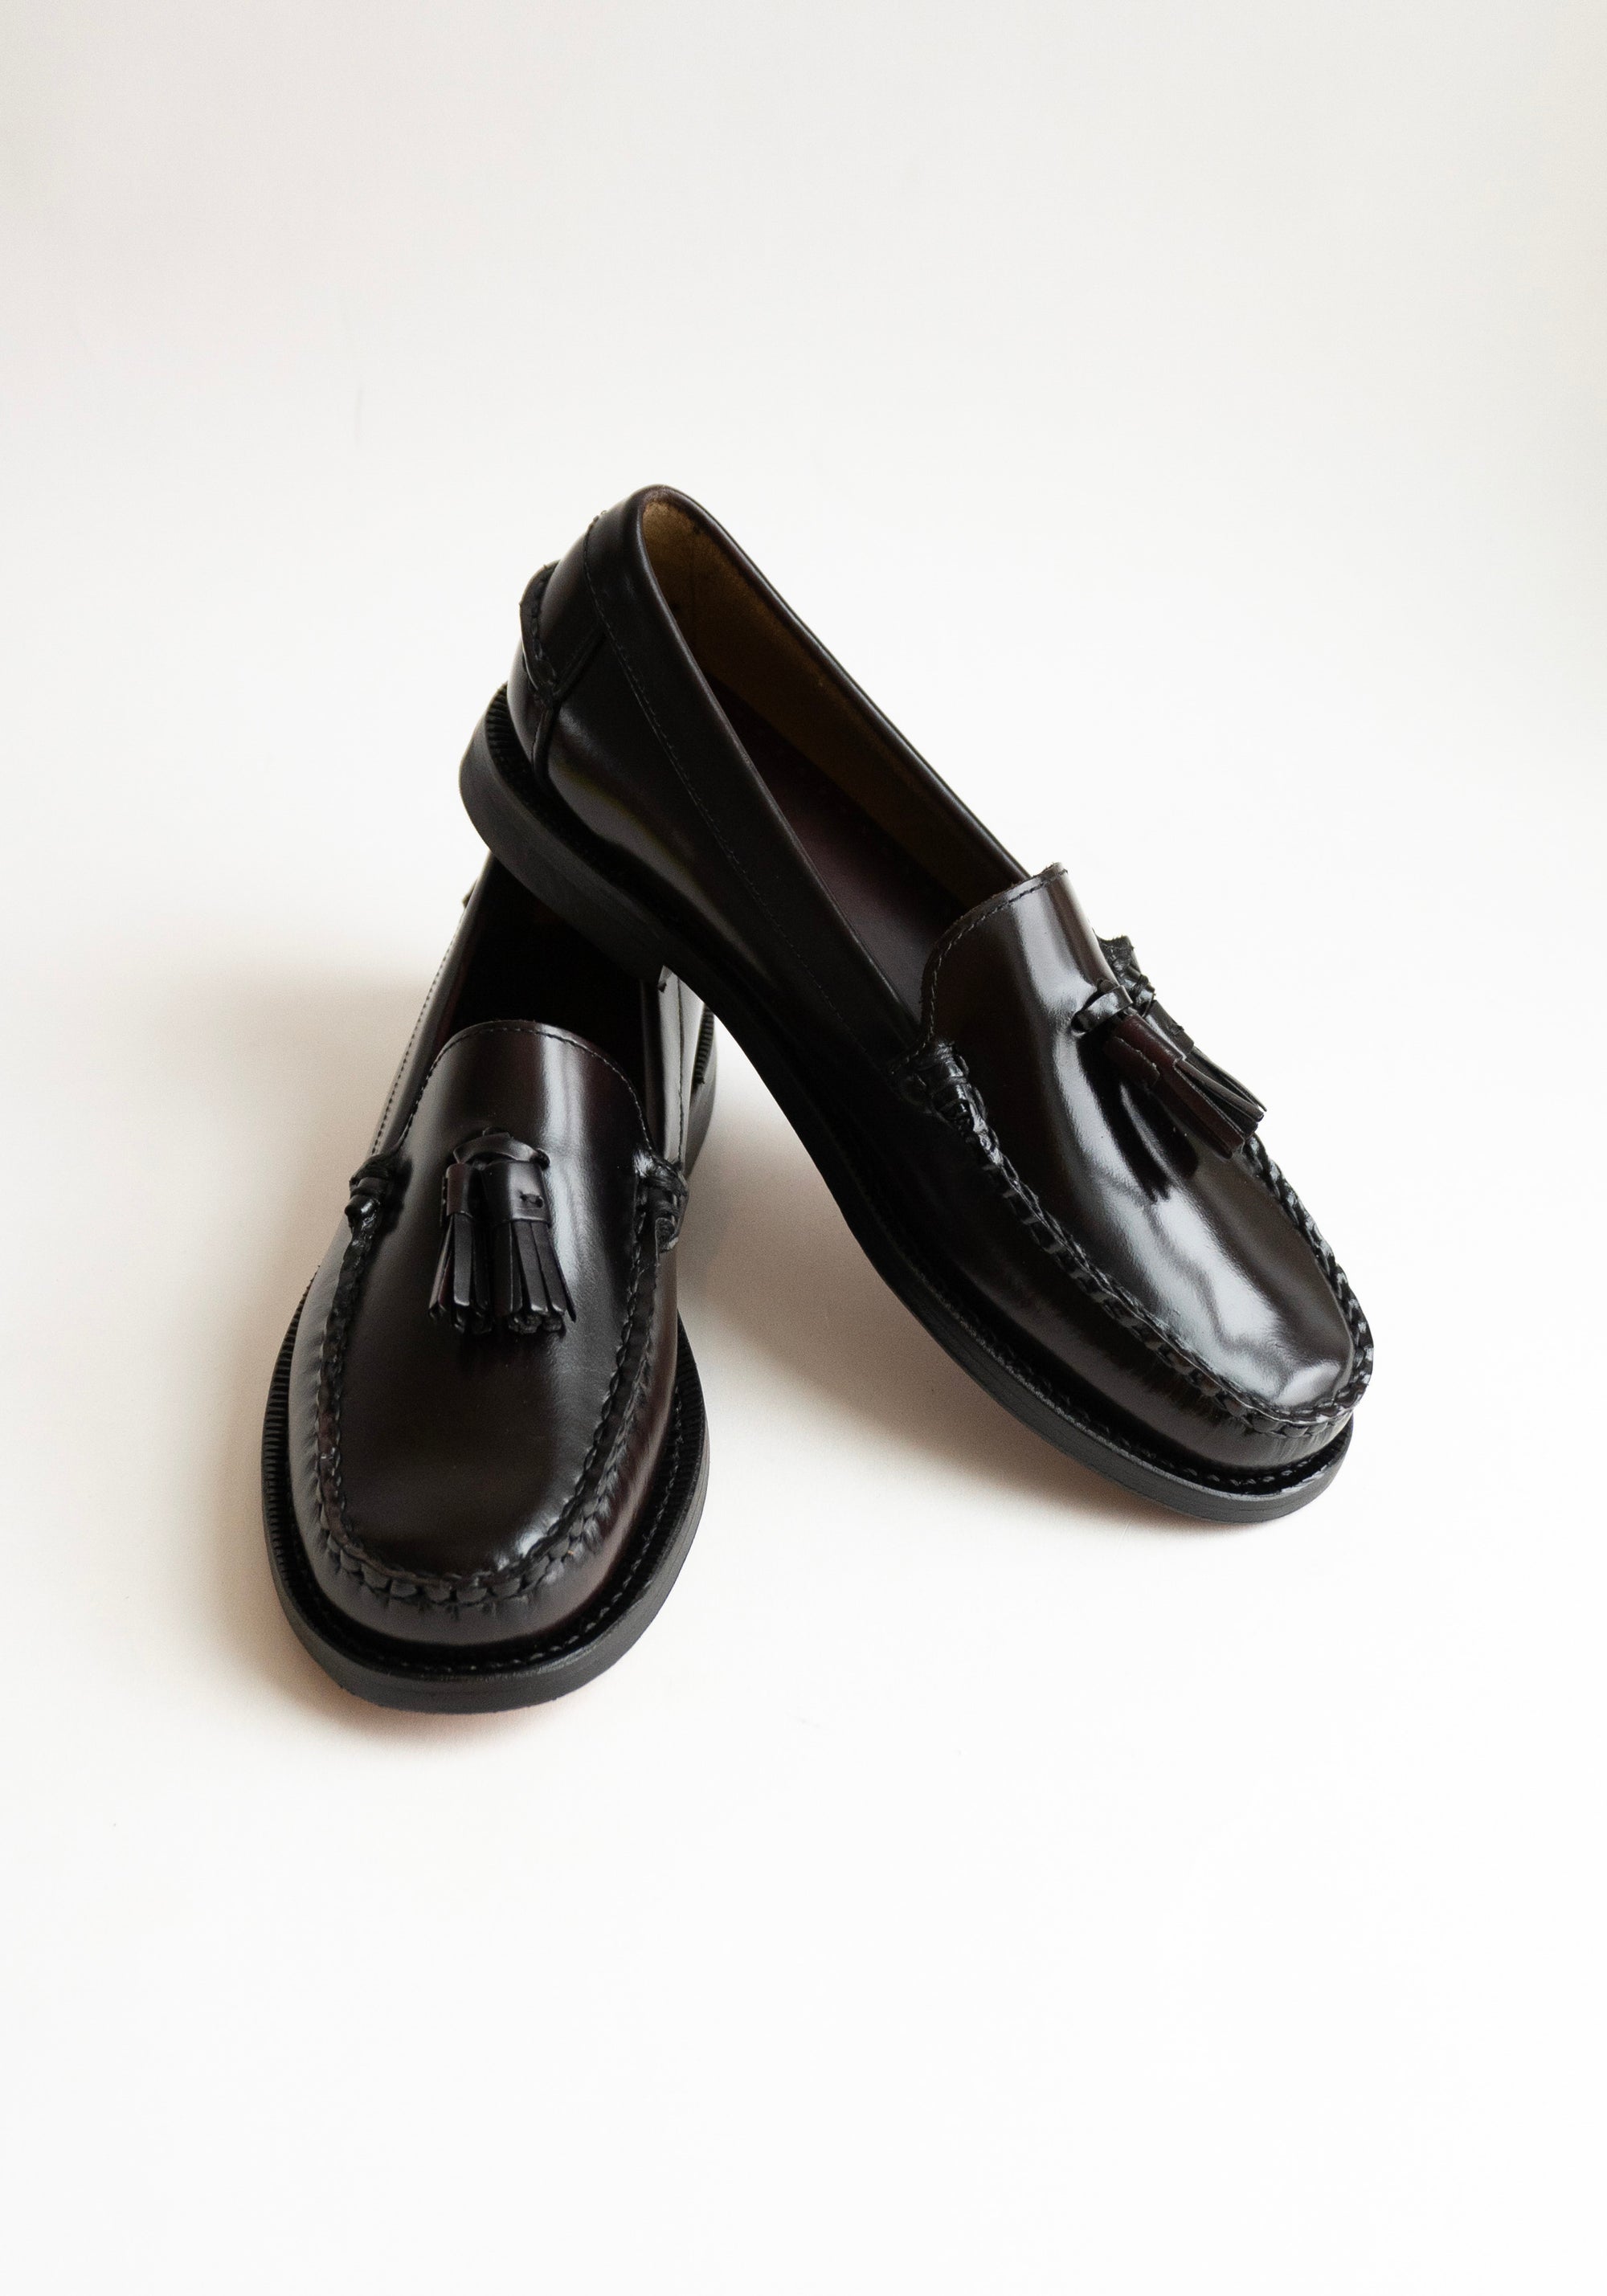 Sebago Classic Will Loafer in Brown Burgundy